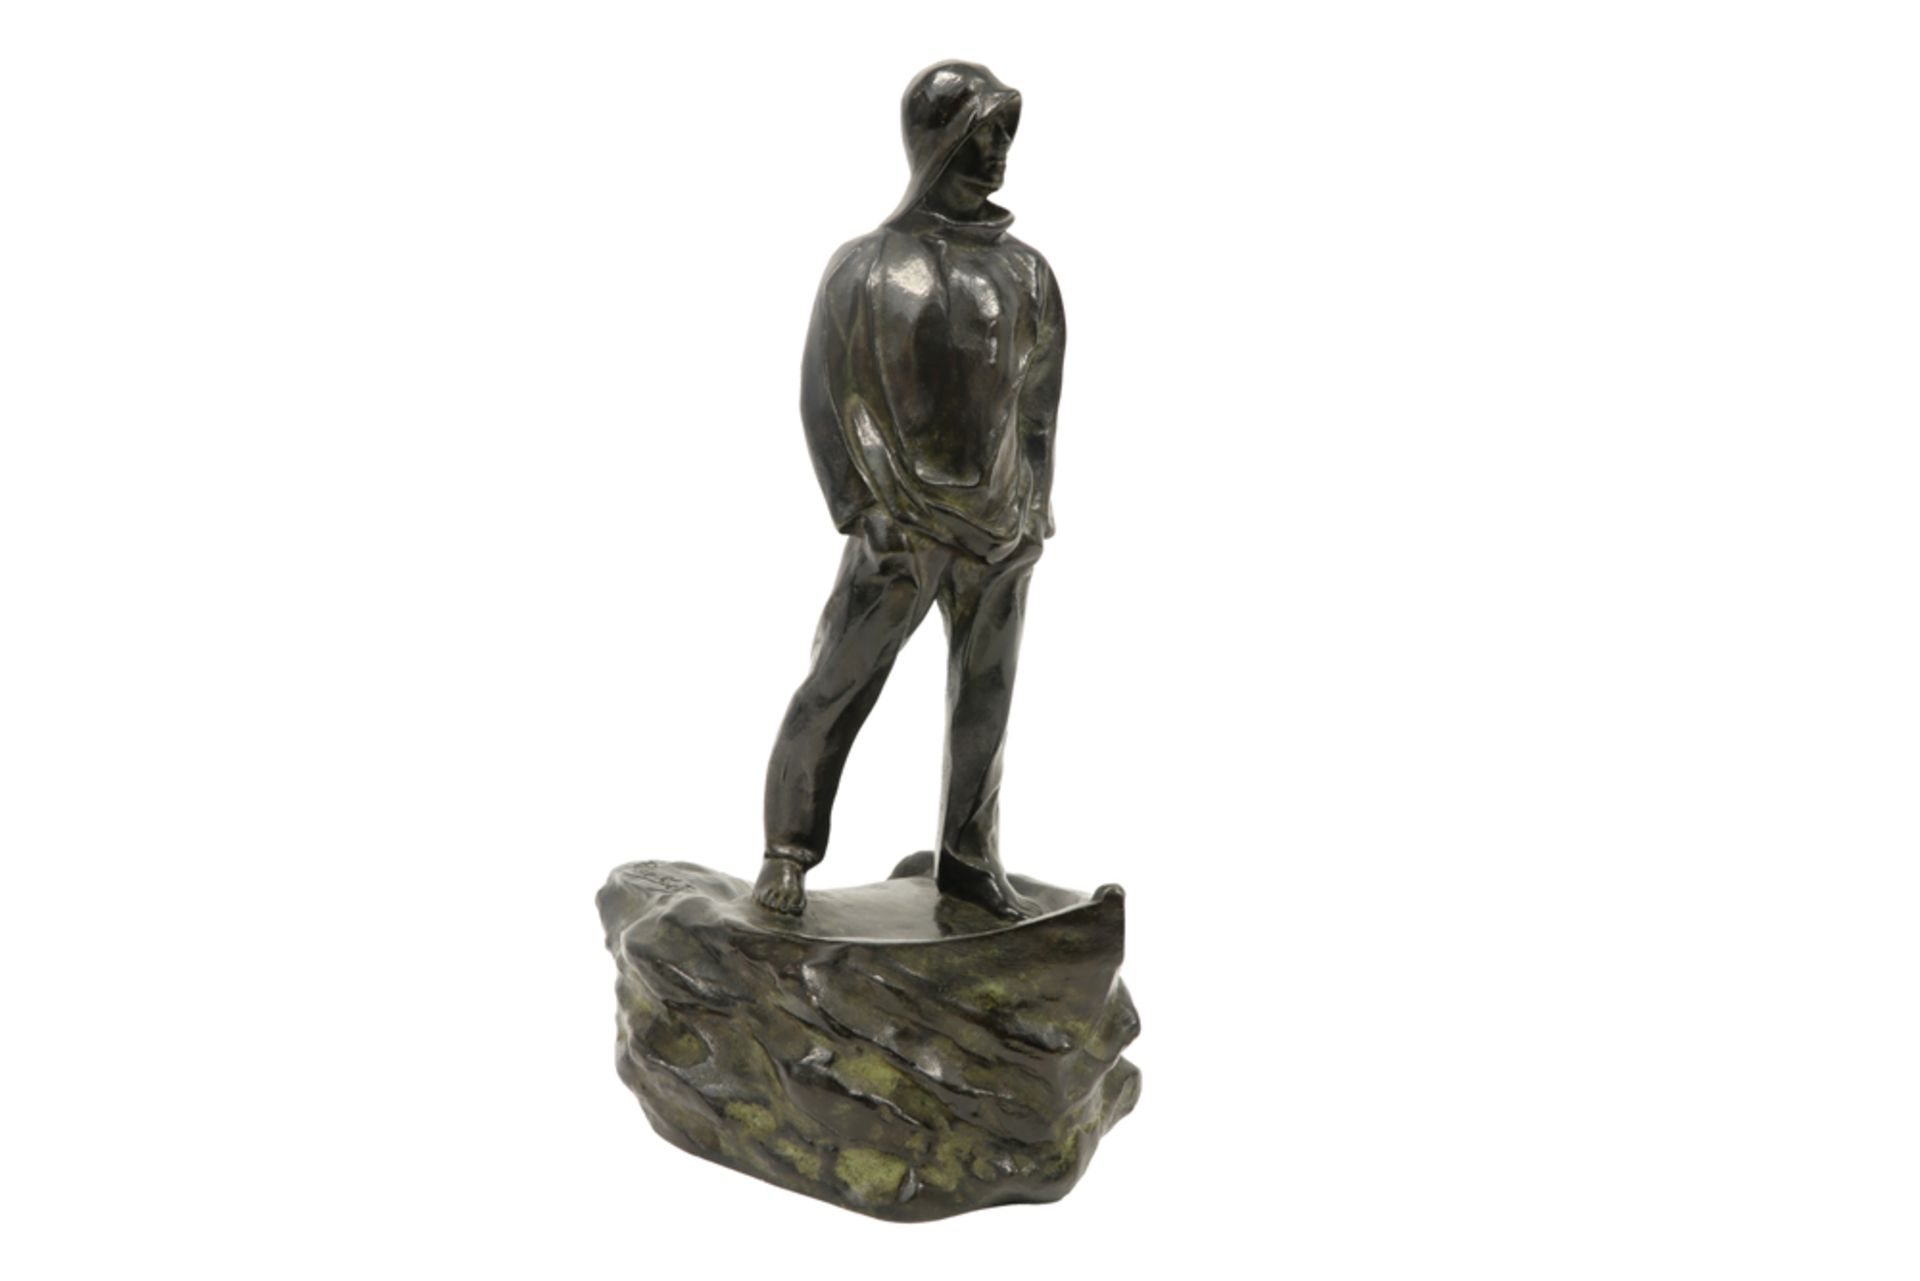 early 20th Cent. "Fisherman" sculpture in bronze - signed Pierre de Soete the big version of this - Image 3 of 5